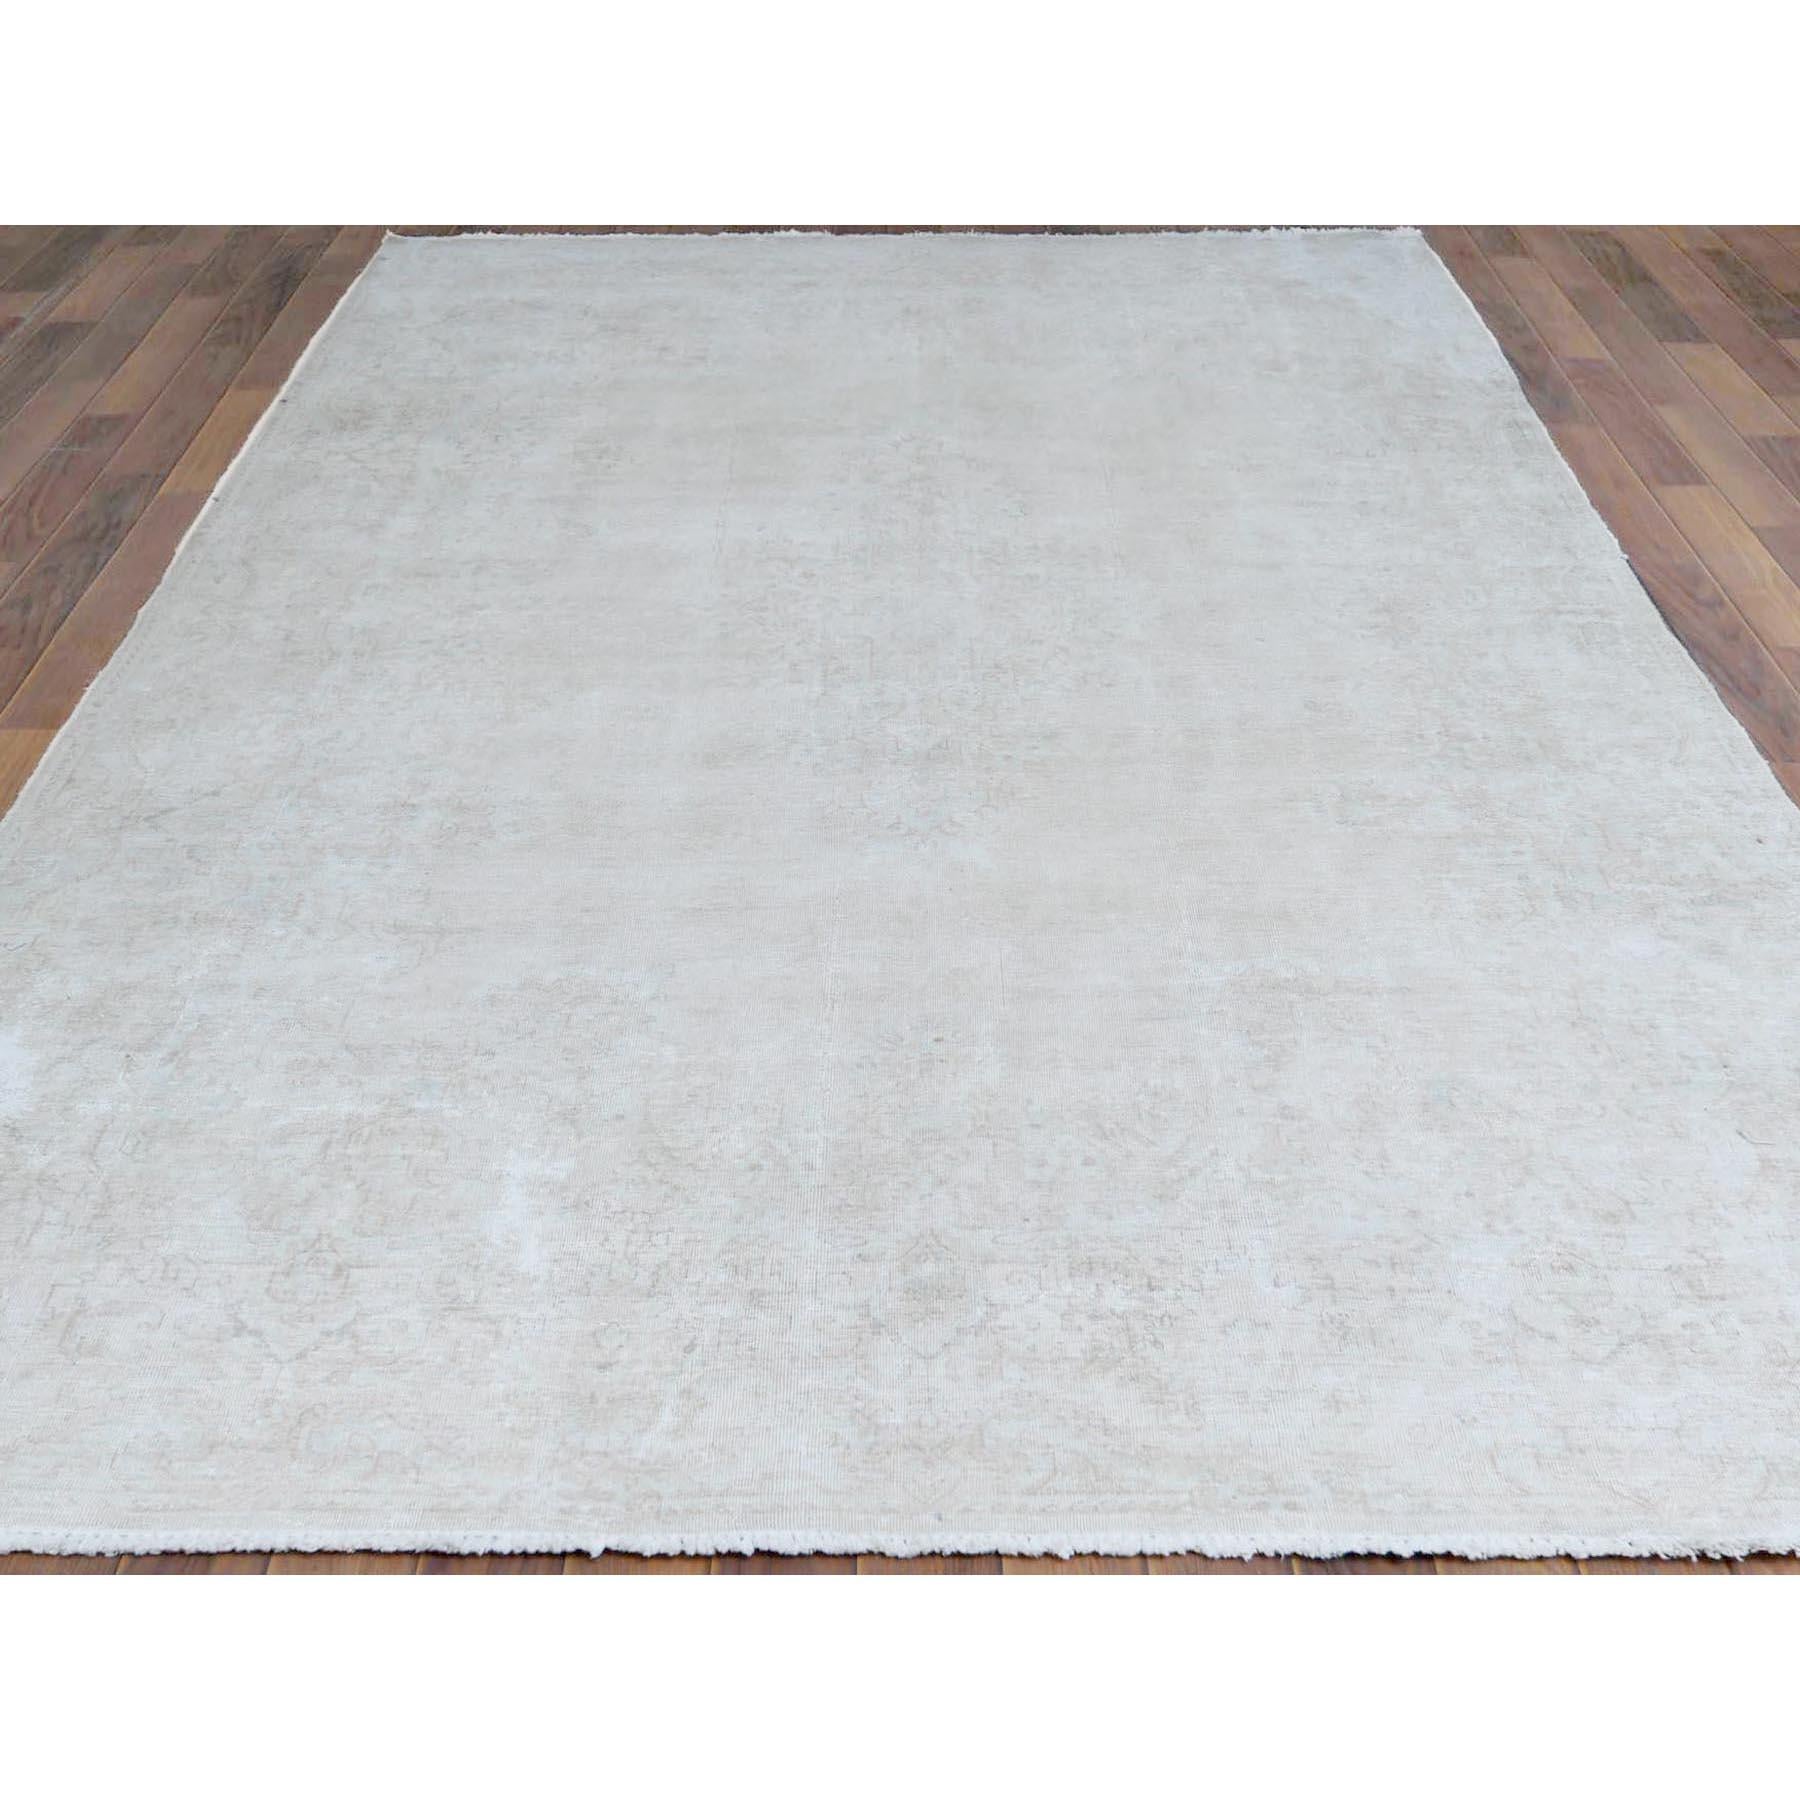 Medieval Bohemian Antique Wash Ivory Persian Kerman Vintage Worn Wool Hand Knotted Rug For Sale